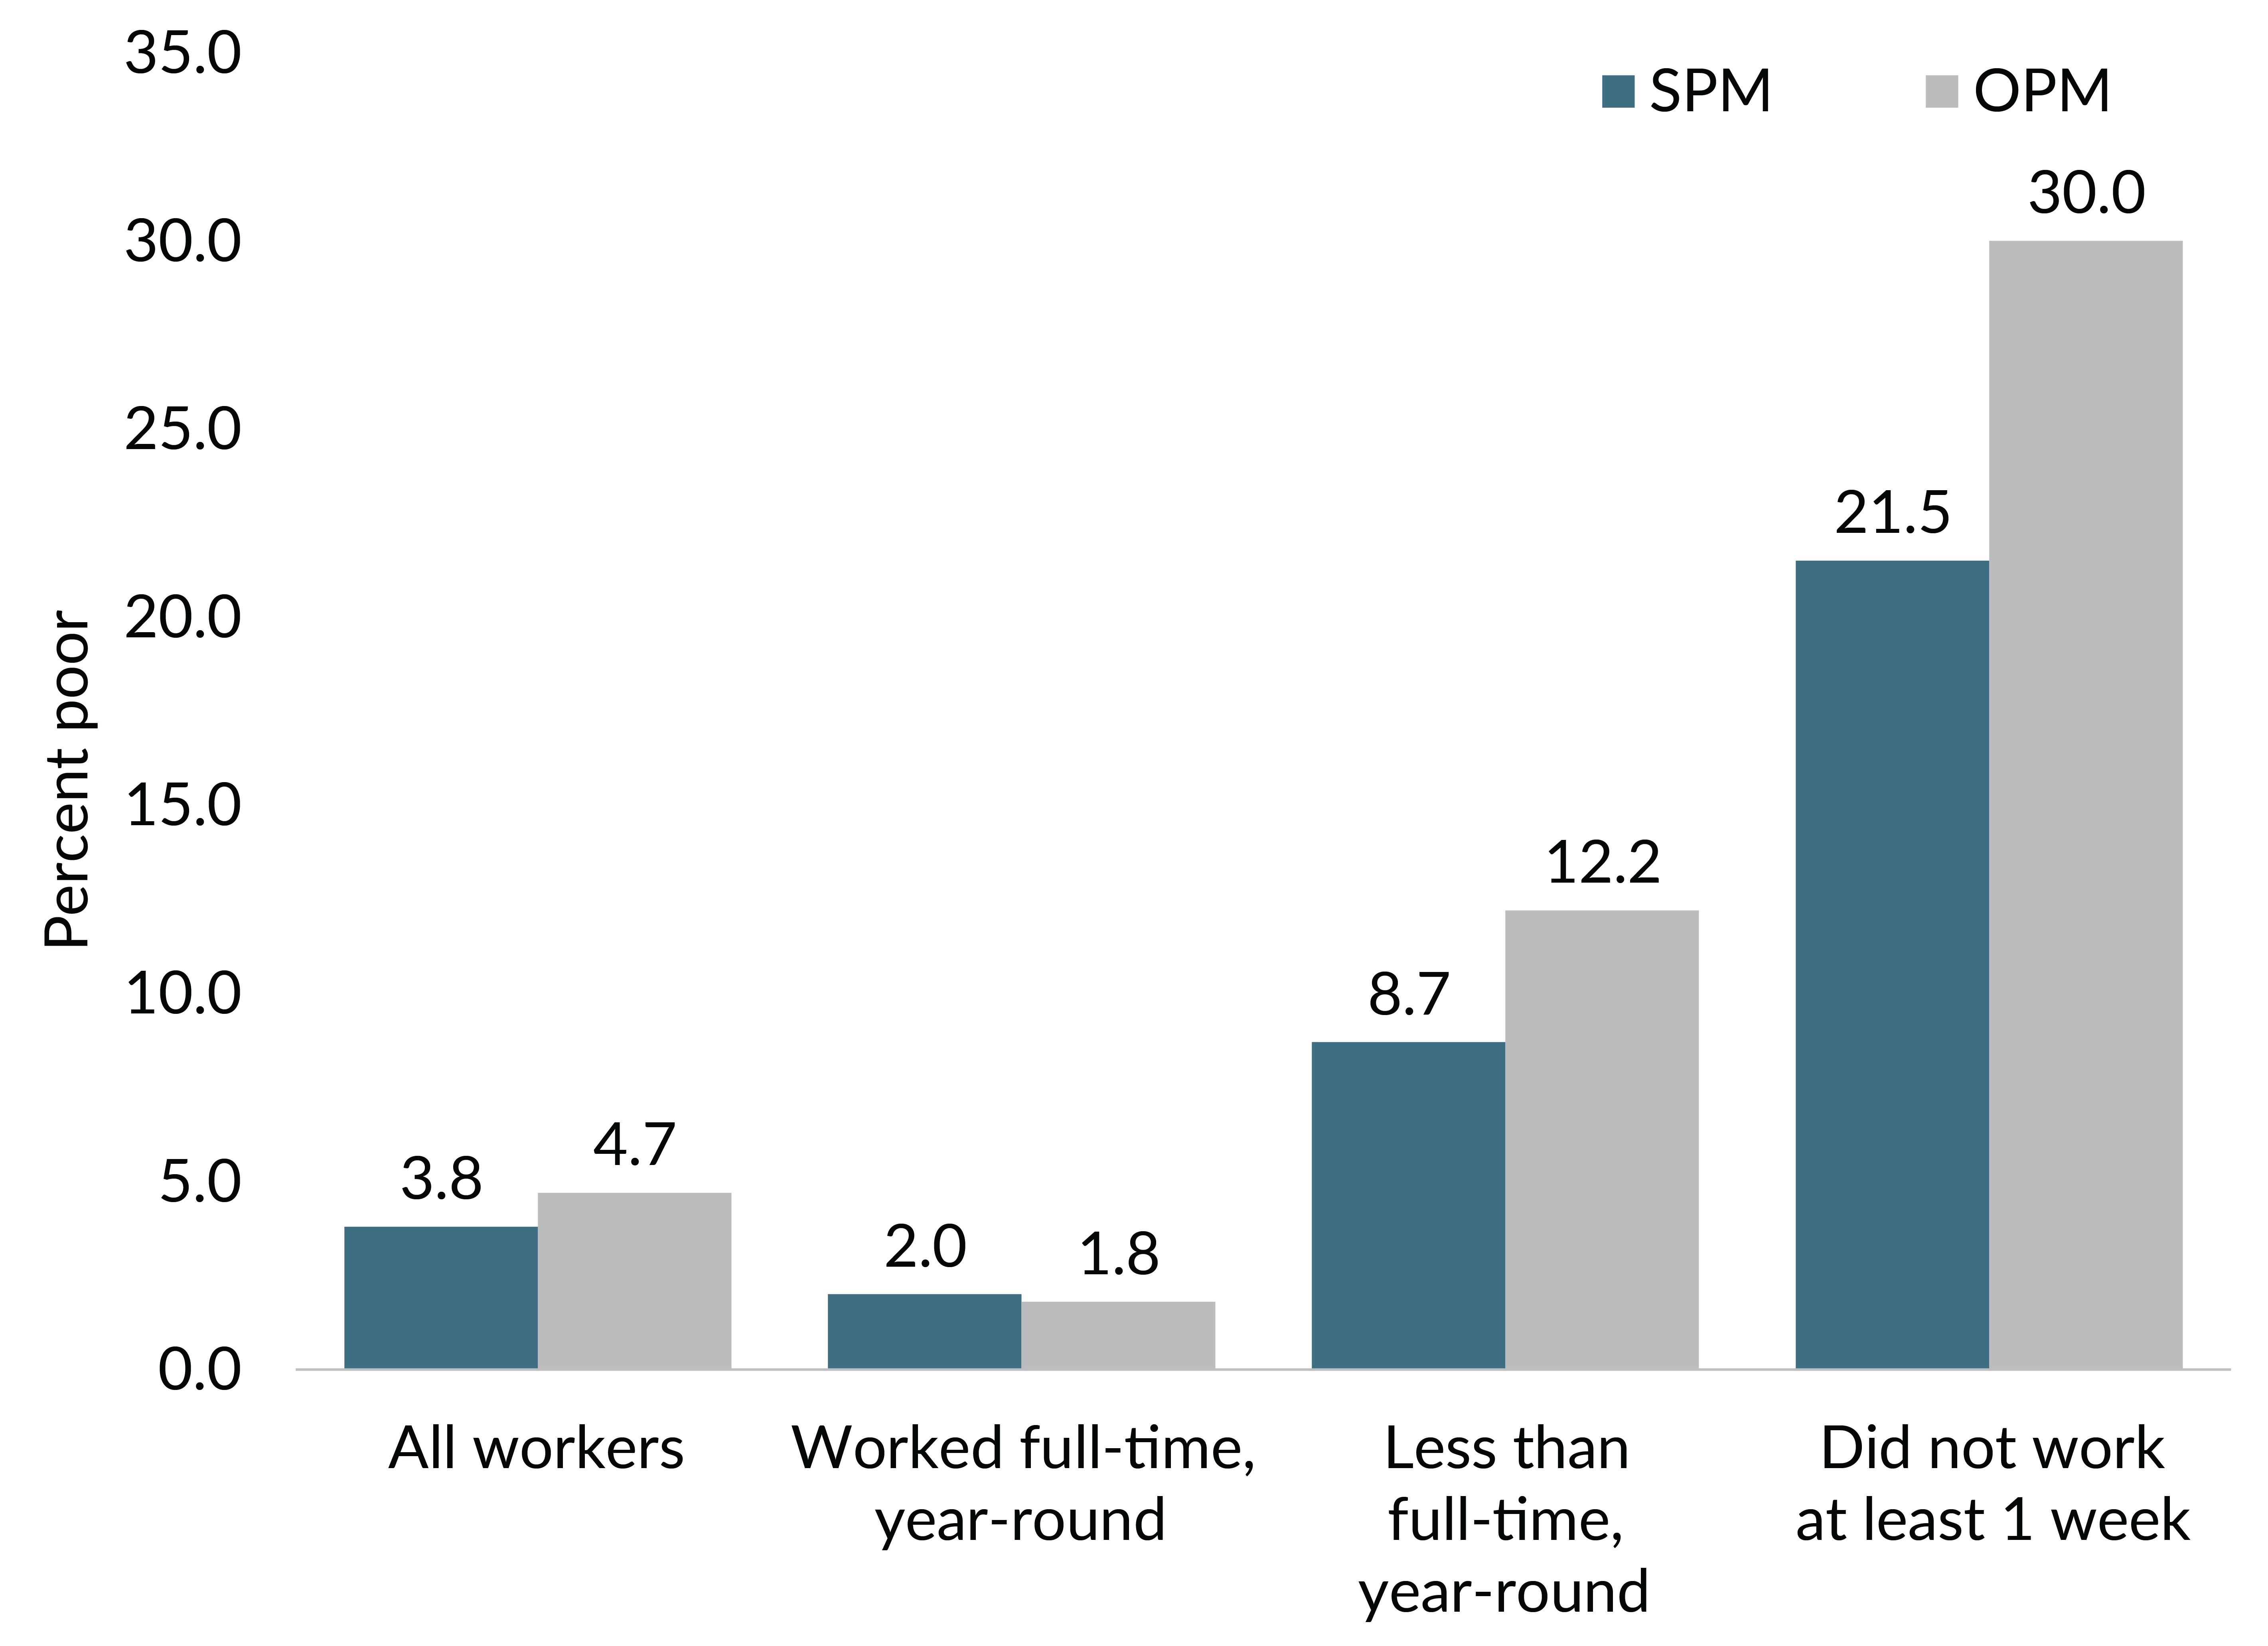  Figure is a column graph displaying SPM and OPM poverty rates for all workers; workers who worked full-time, year-round; less than full-time, year-round; and those who did not work at least one week.